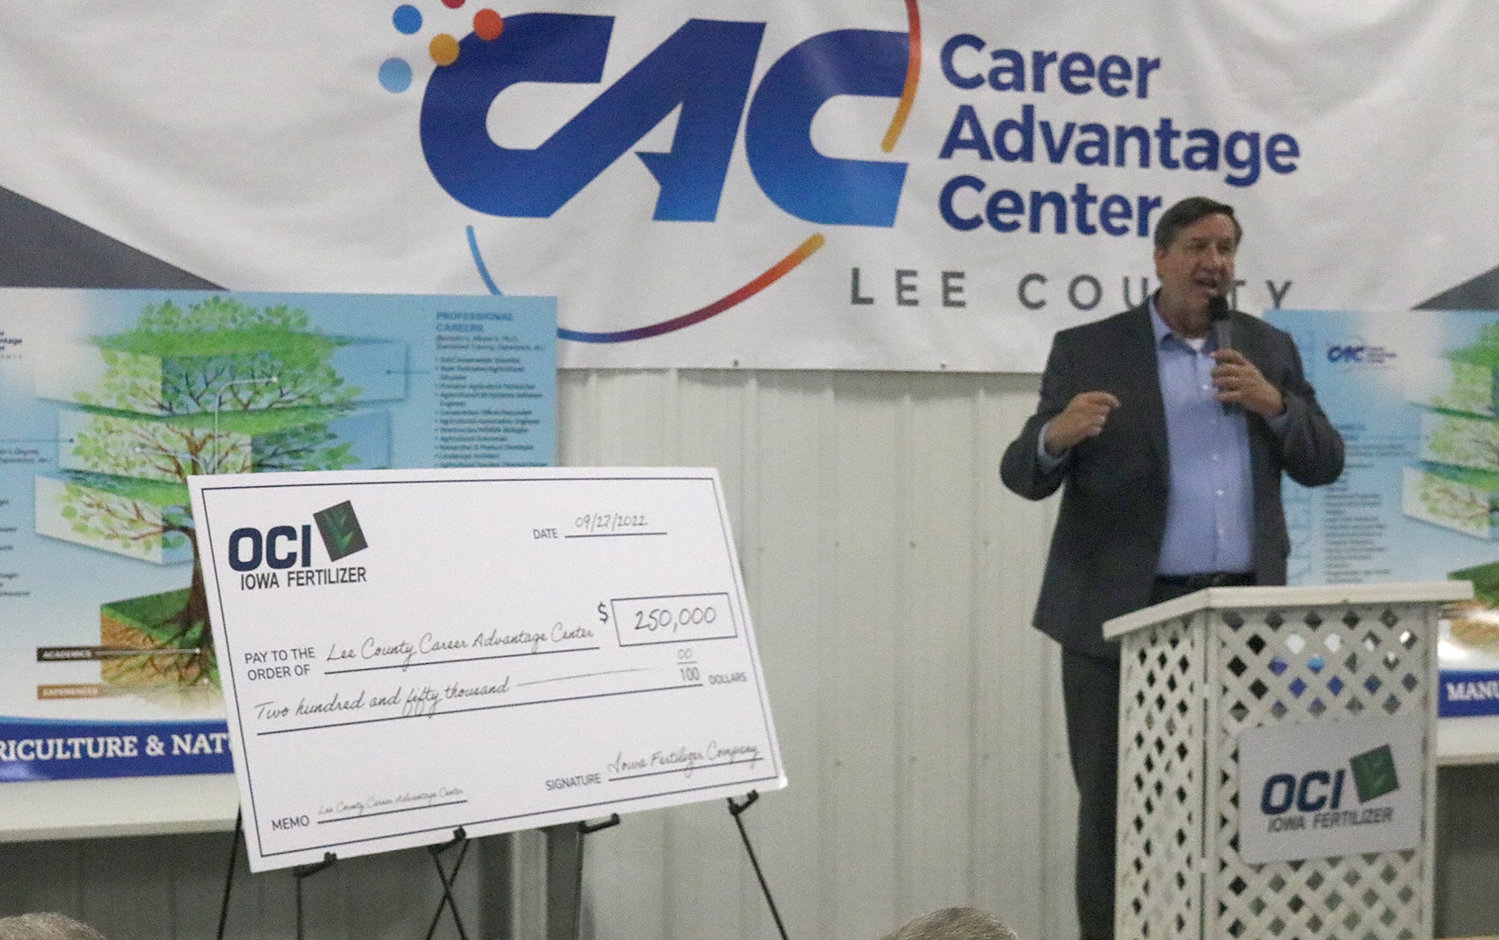 Lee County Economic Development Group President and CEO Dennis Fraise announces a $250,000 donation to the Lee County Career Advancement Center from OCI Iowa Fertilizer Tuesday afternoon in Montrose